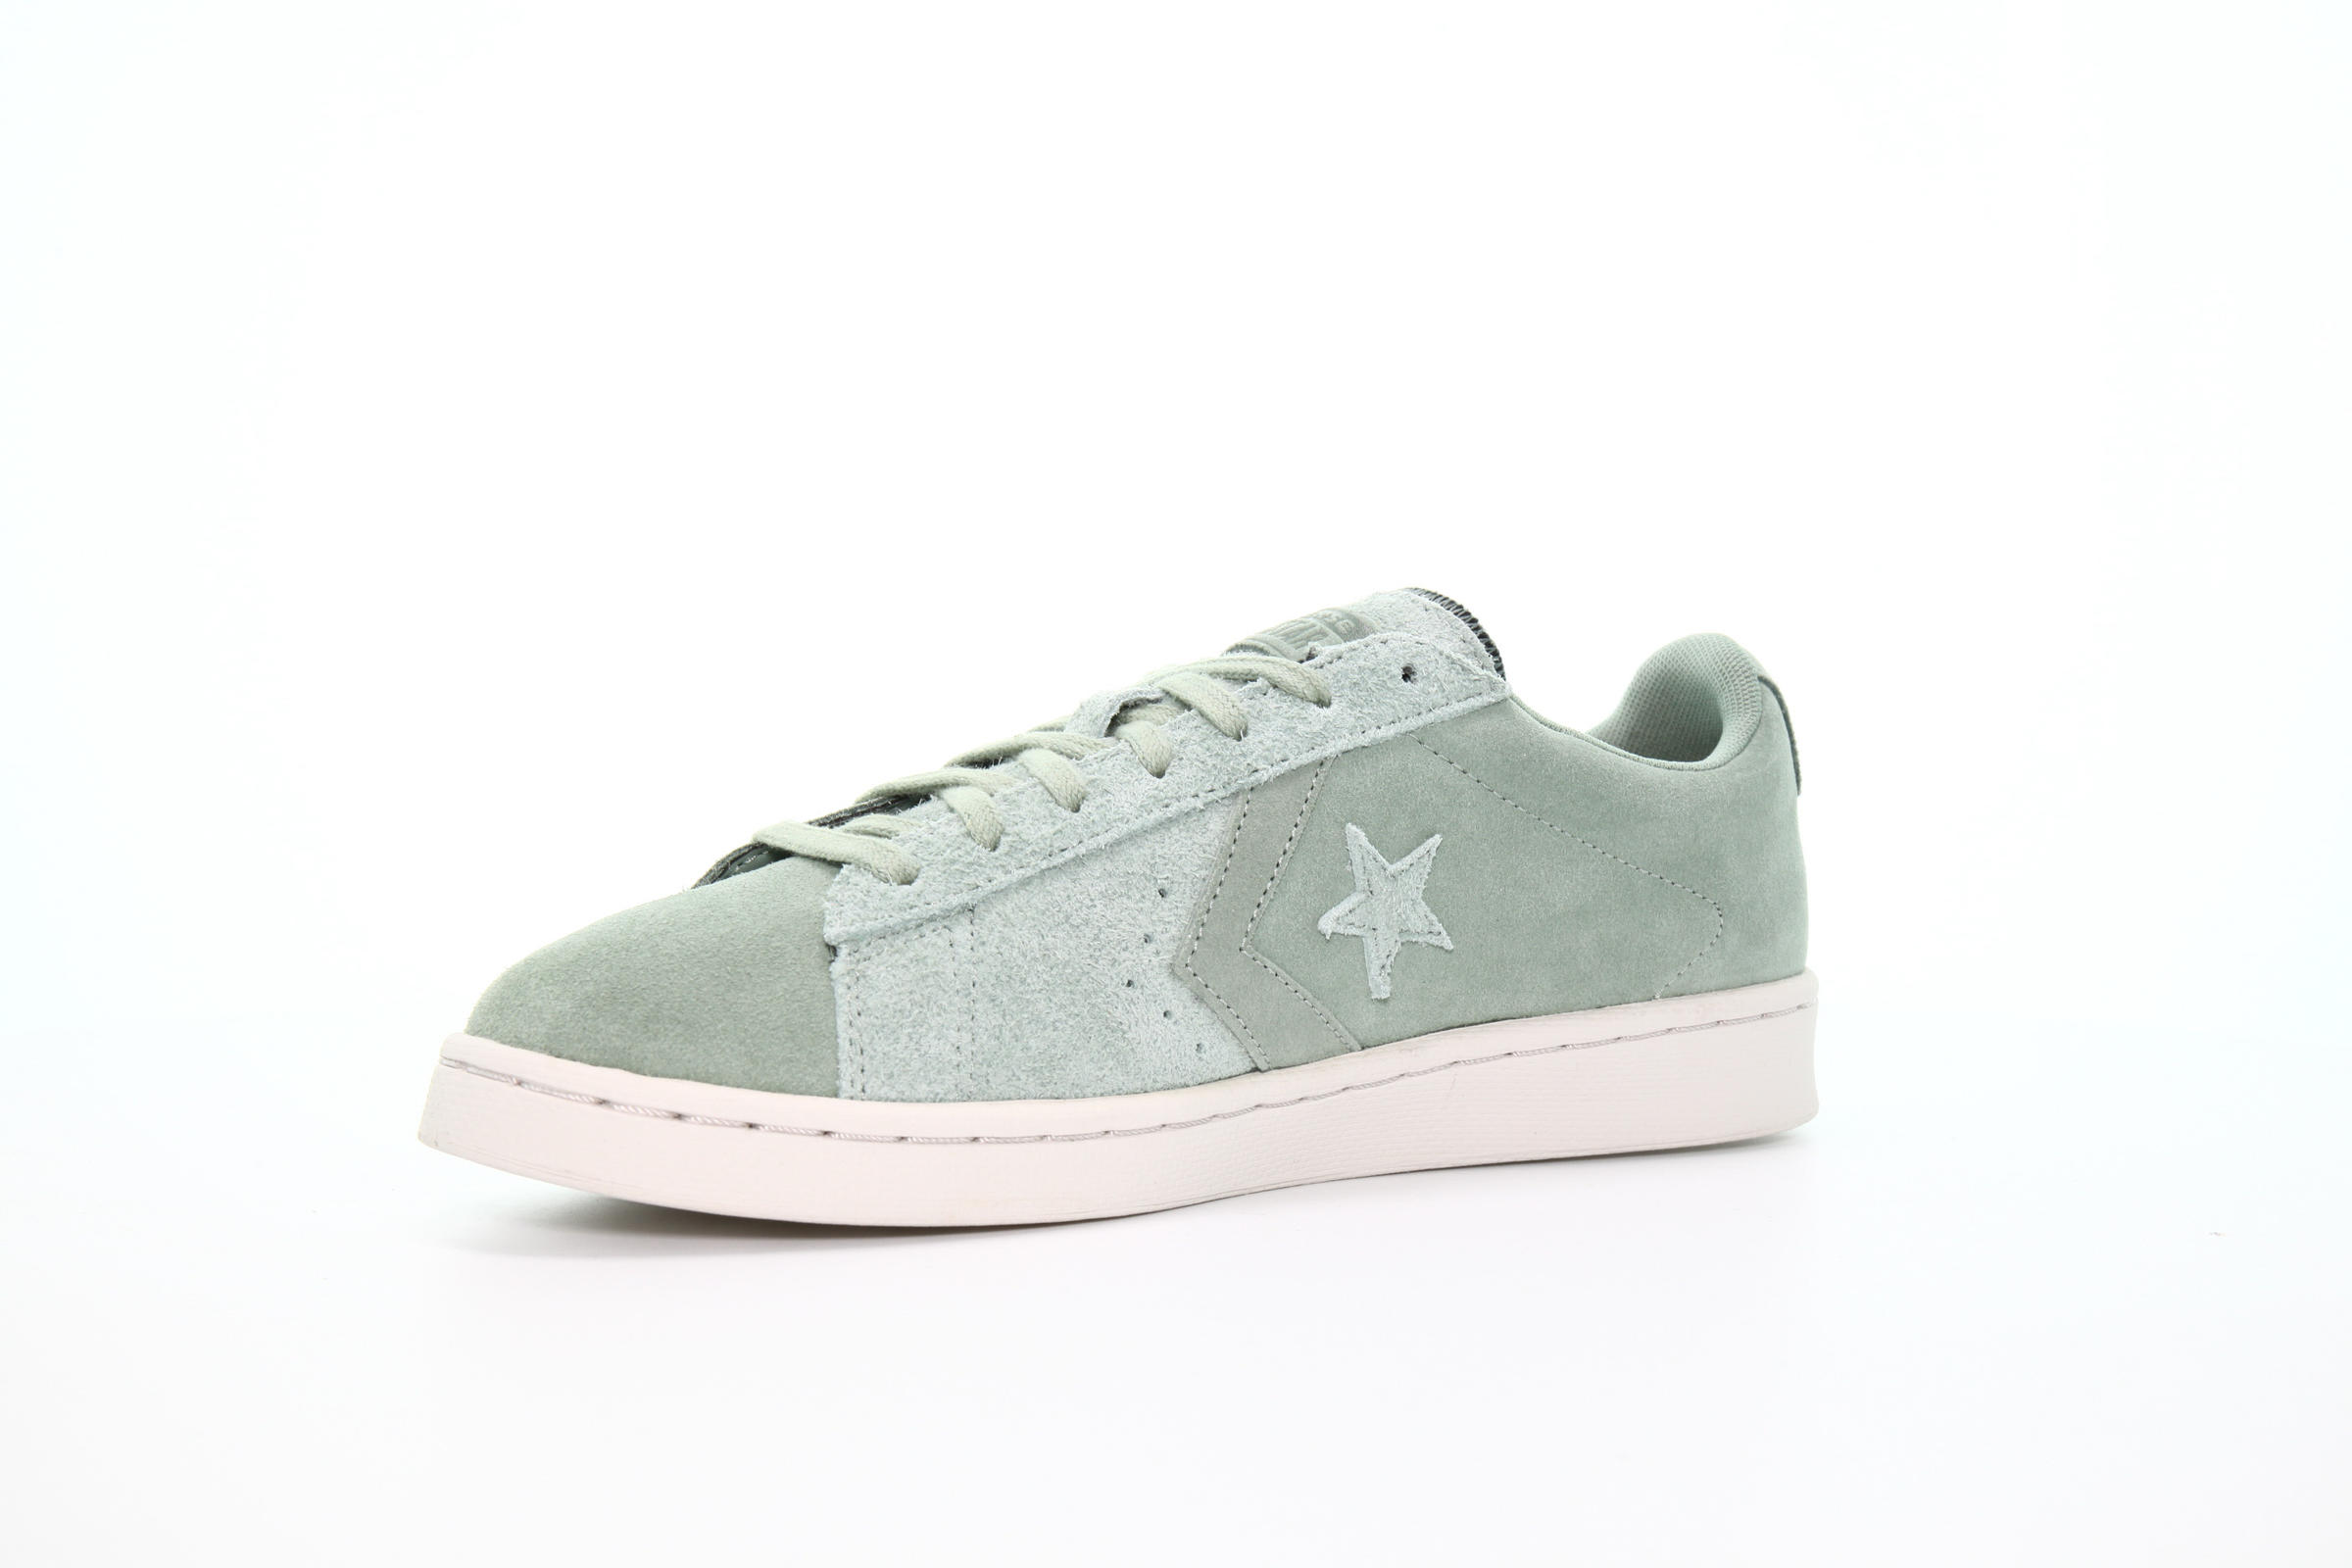 Converse x CONVERSE EARTH TONE SUEDE PRO LEATHER OX "LILY PAD"